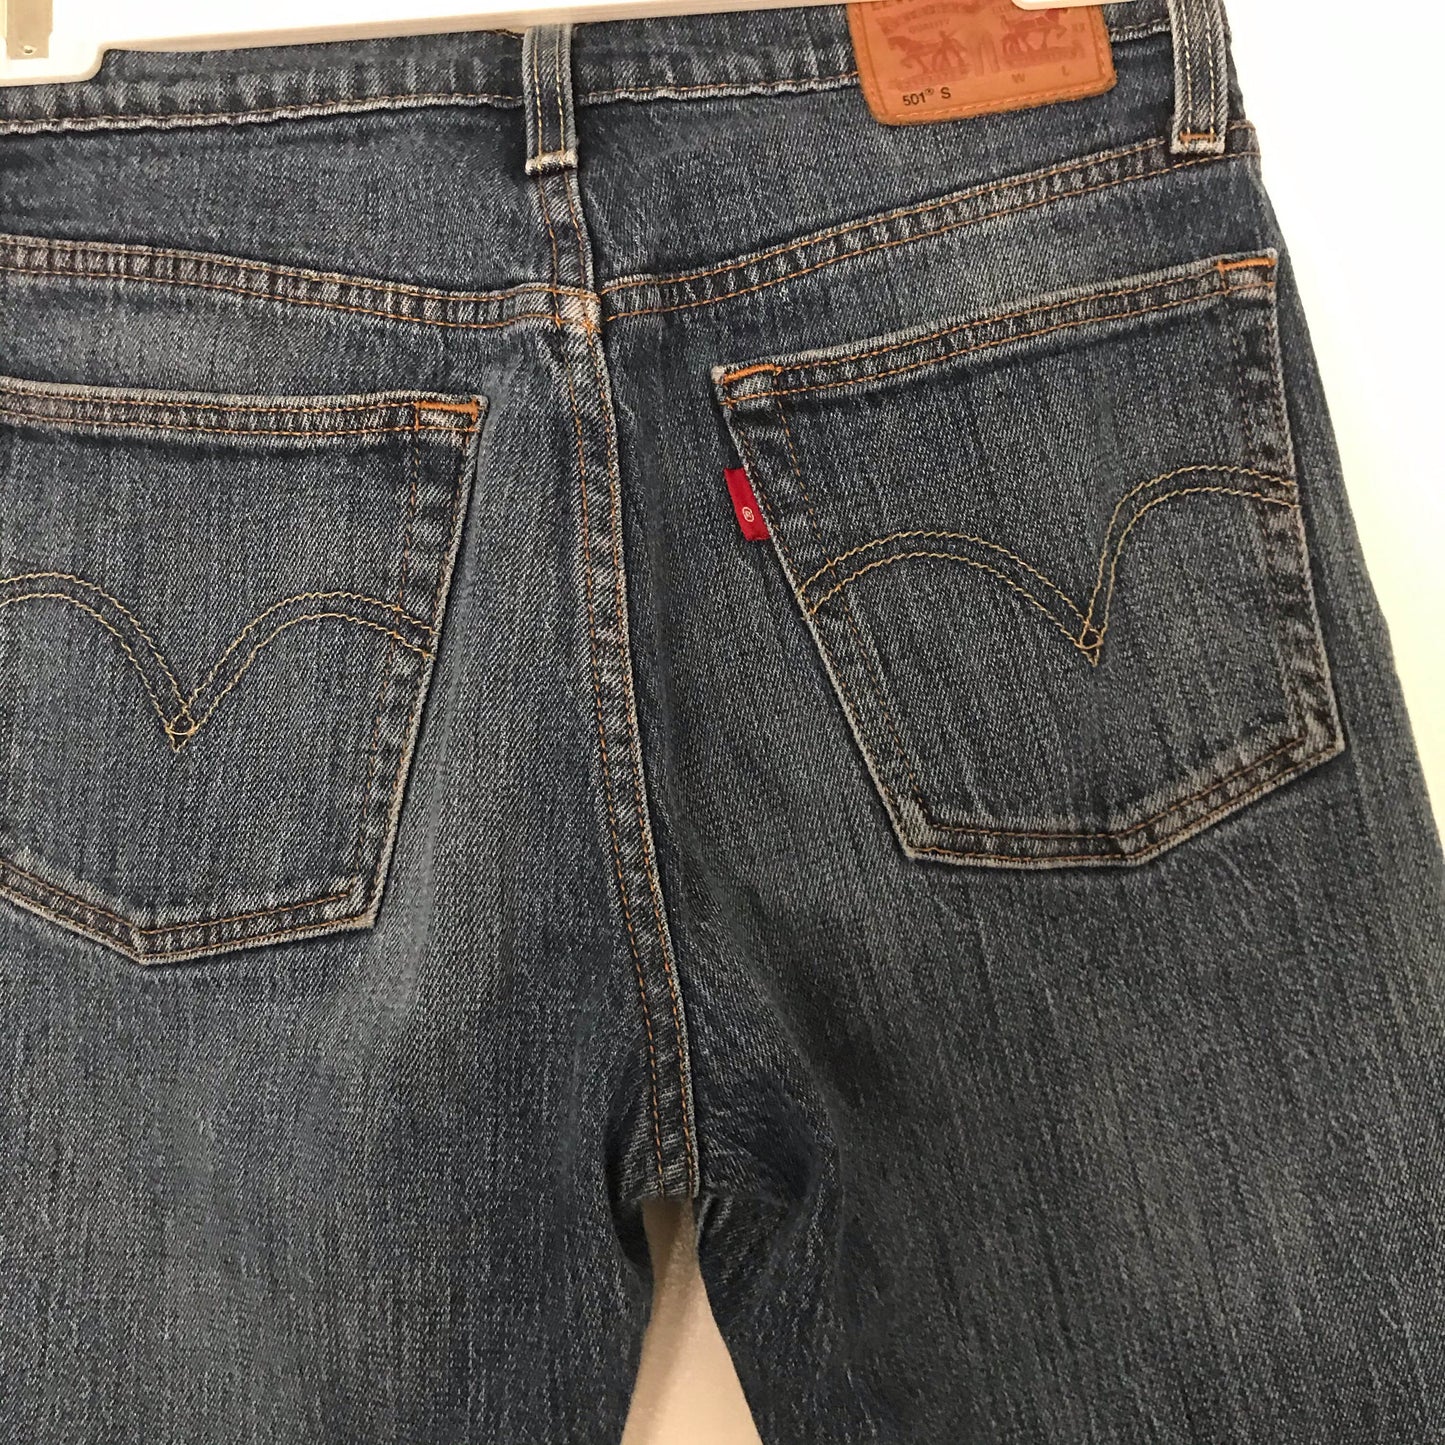 Prelovely | Levis 501 Button Fly Skinny Blue Mid Rise Jeans